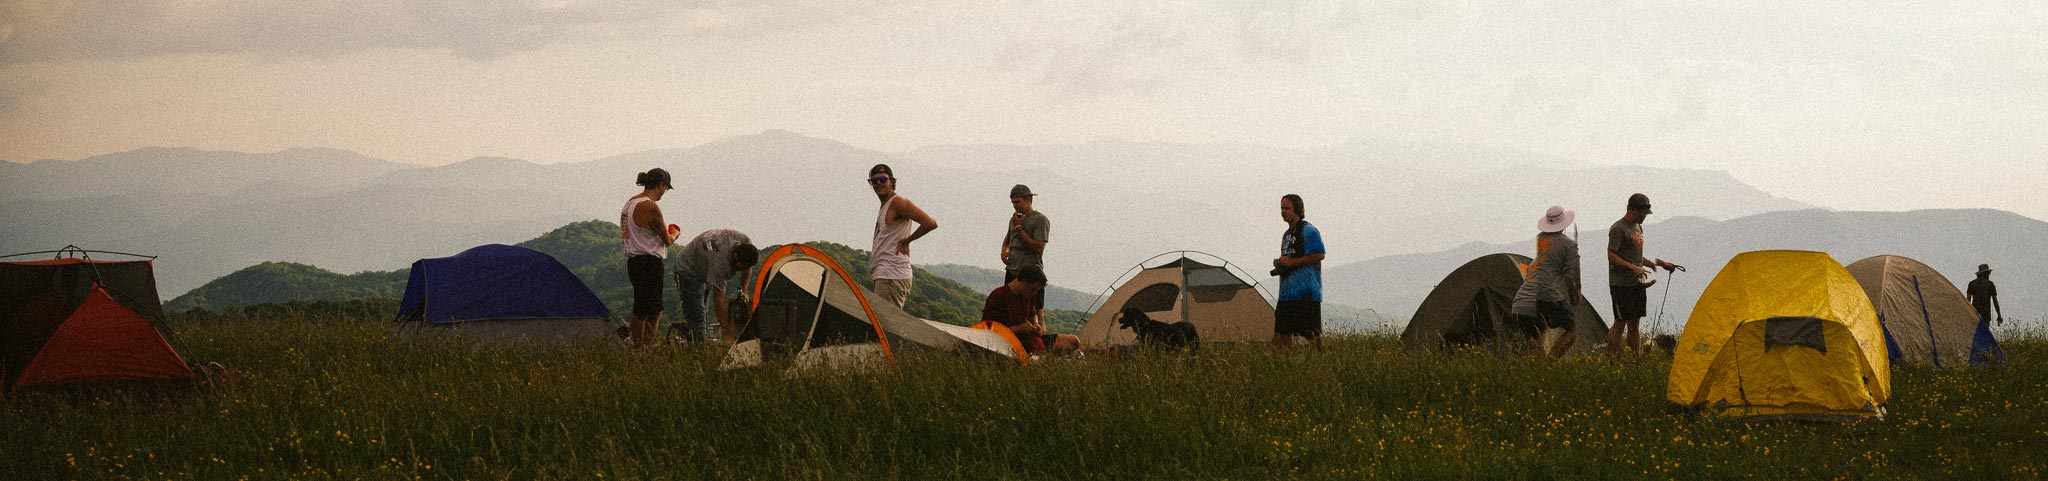 A photograph of students camping